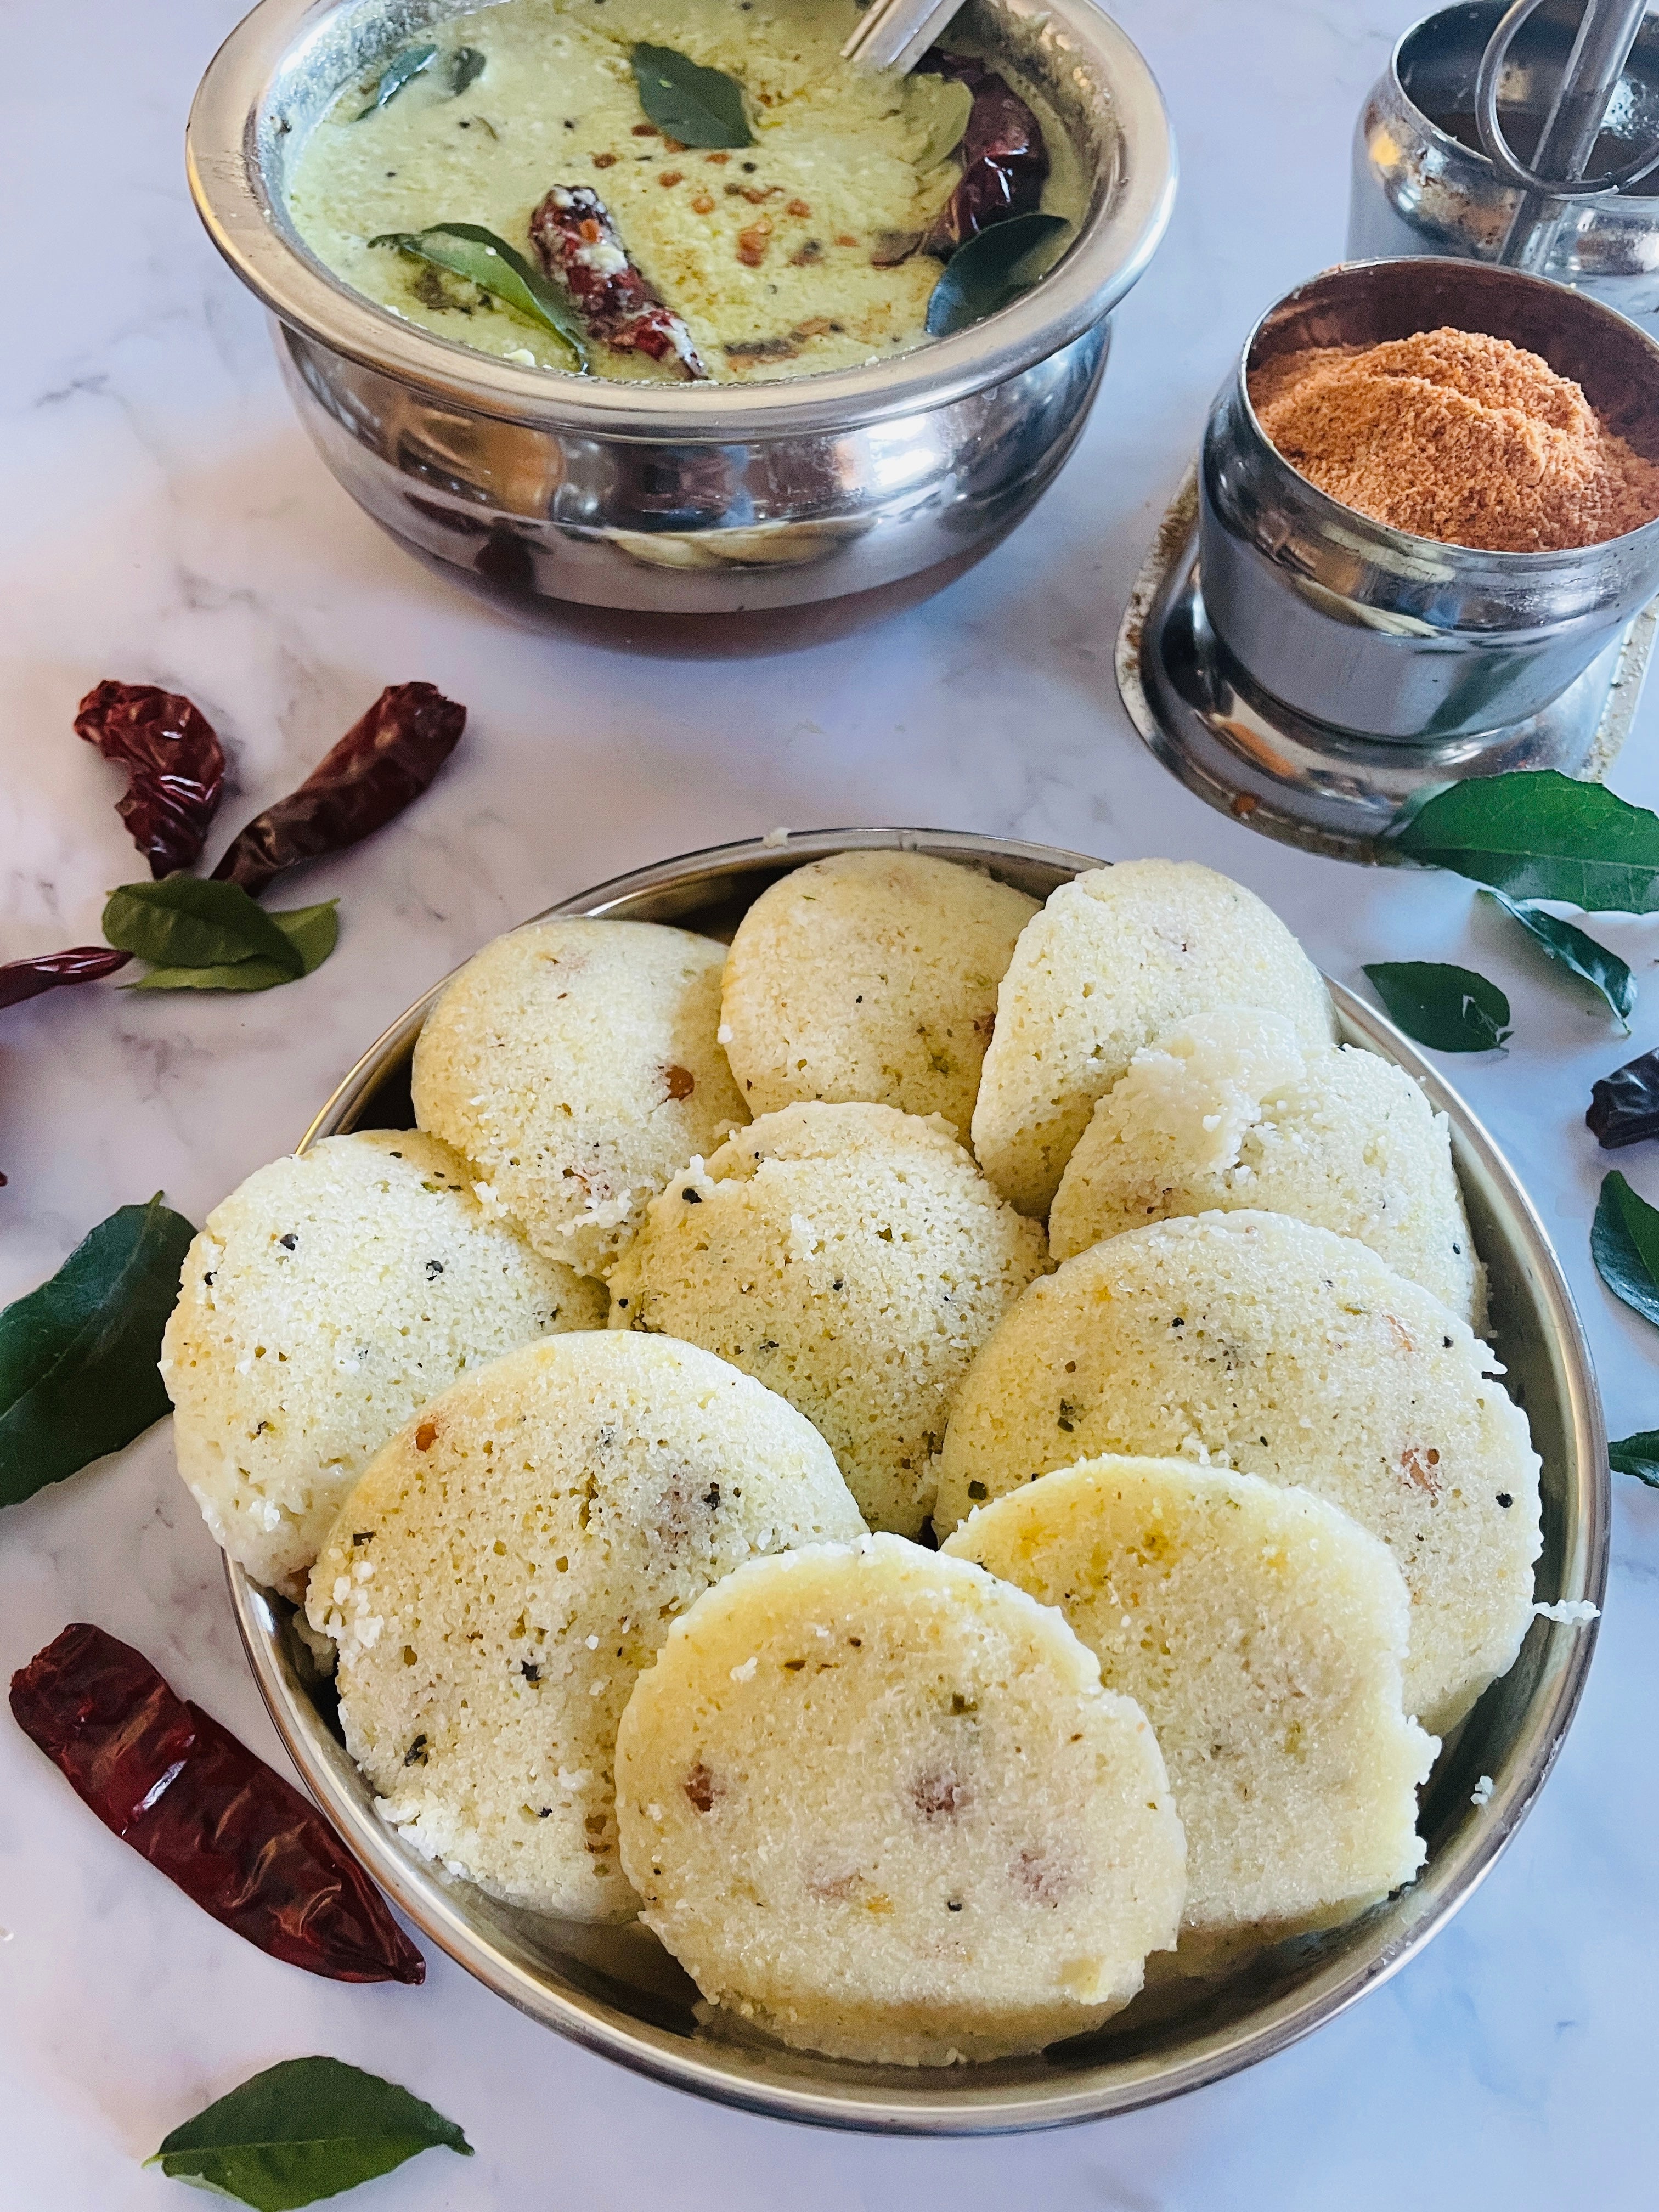 Oats Idli presented with traditional coconut sauce 